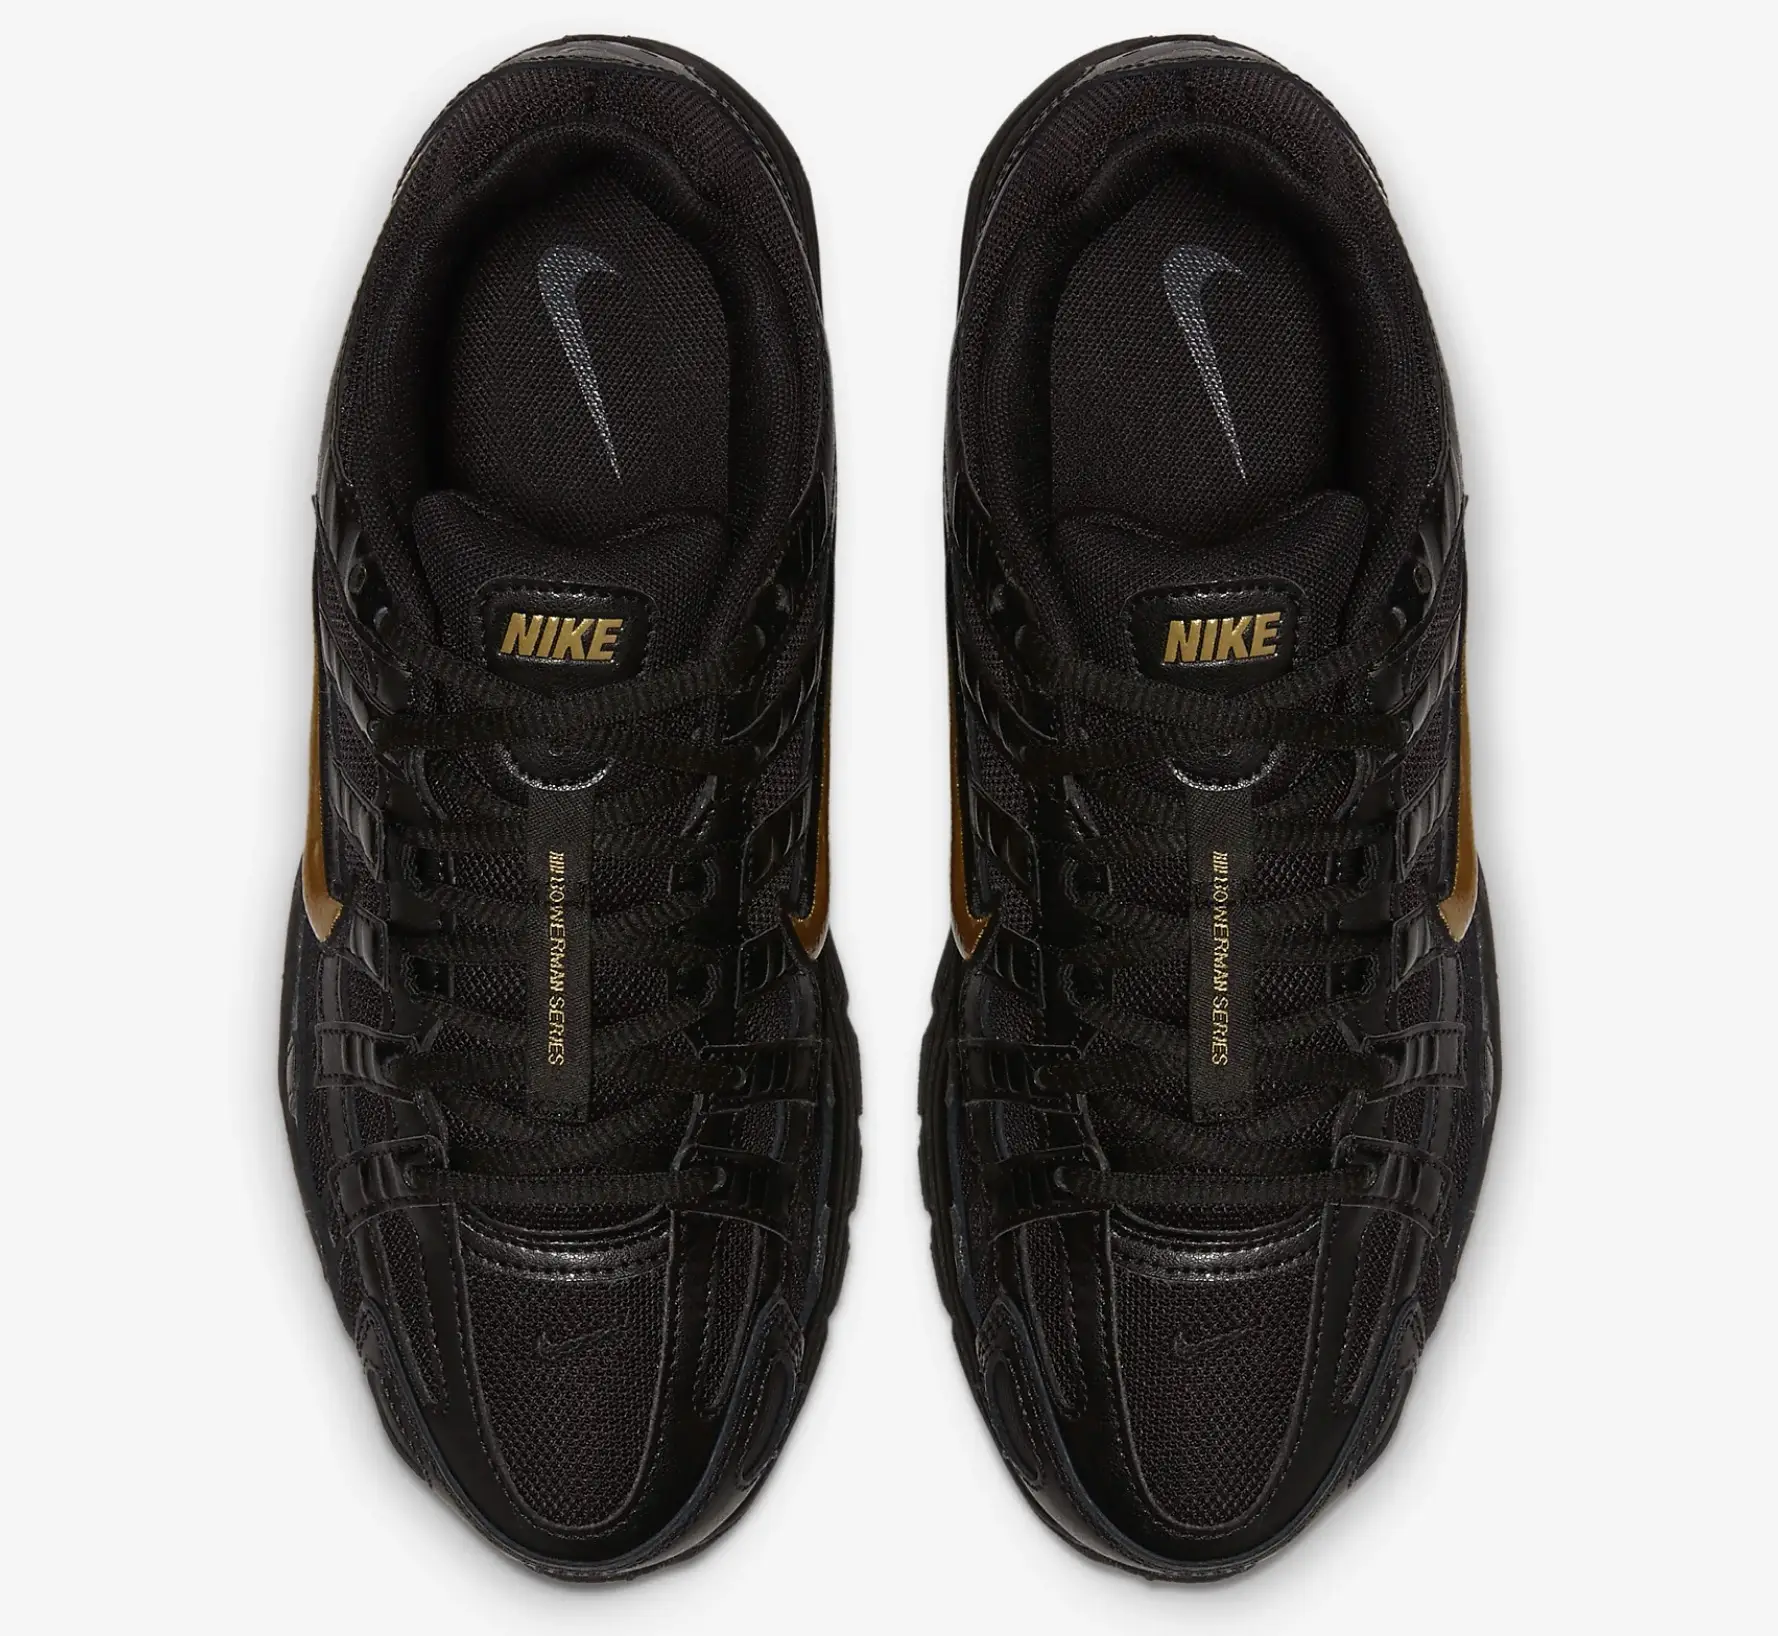 The Nike P-6000 Has Had An AW19 Makeover In Black And Gold | The Sole ...